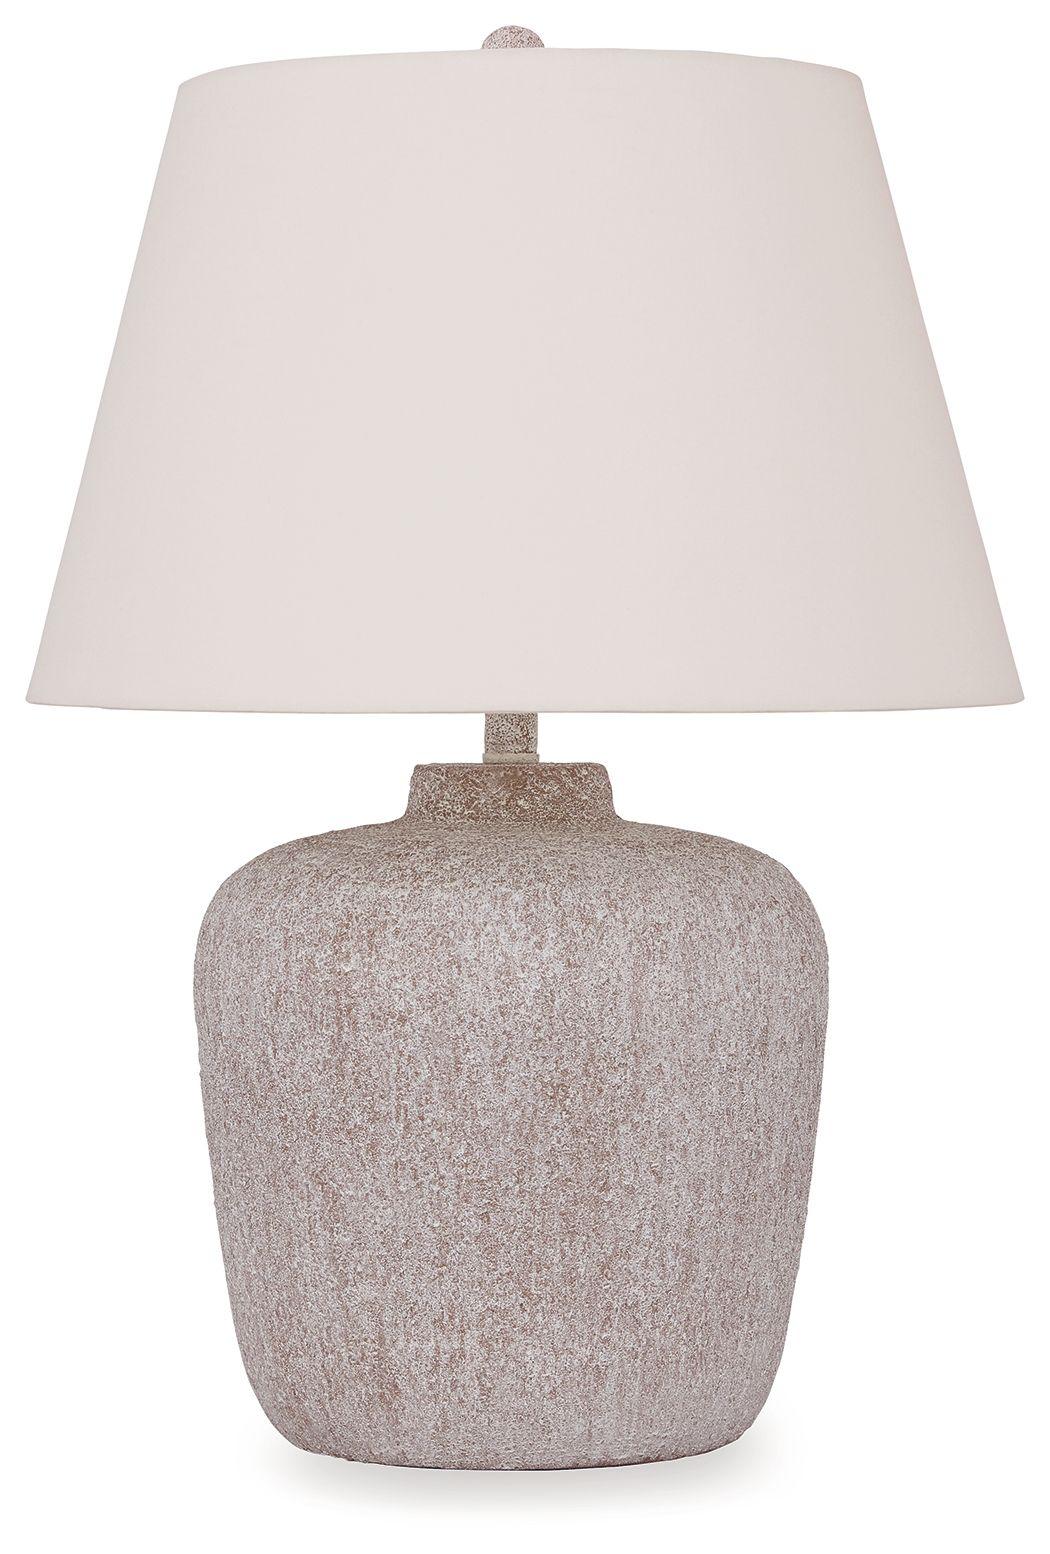 Signature Design by Ashley® - Danry - Distressed Cream - Metal Table Lamp - 5th Avenue Furniture